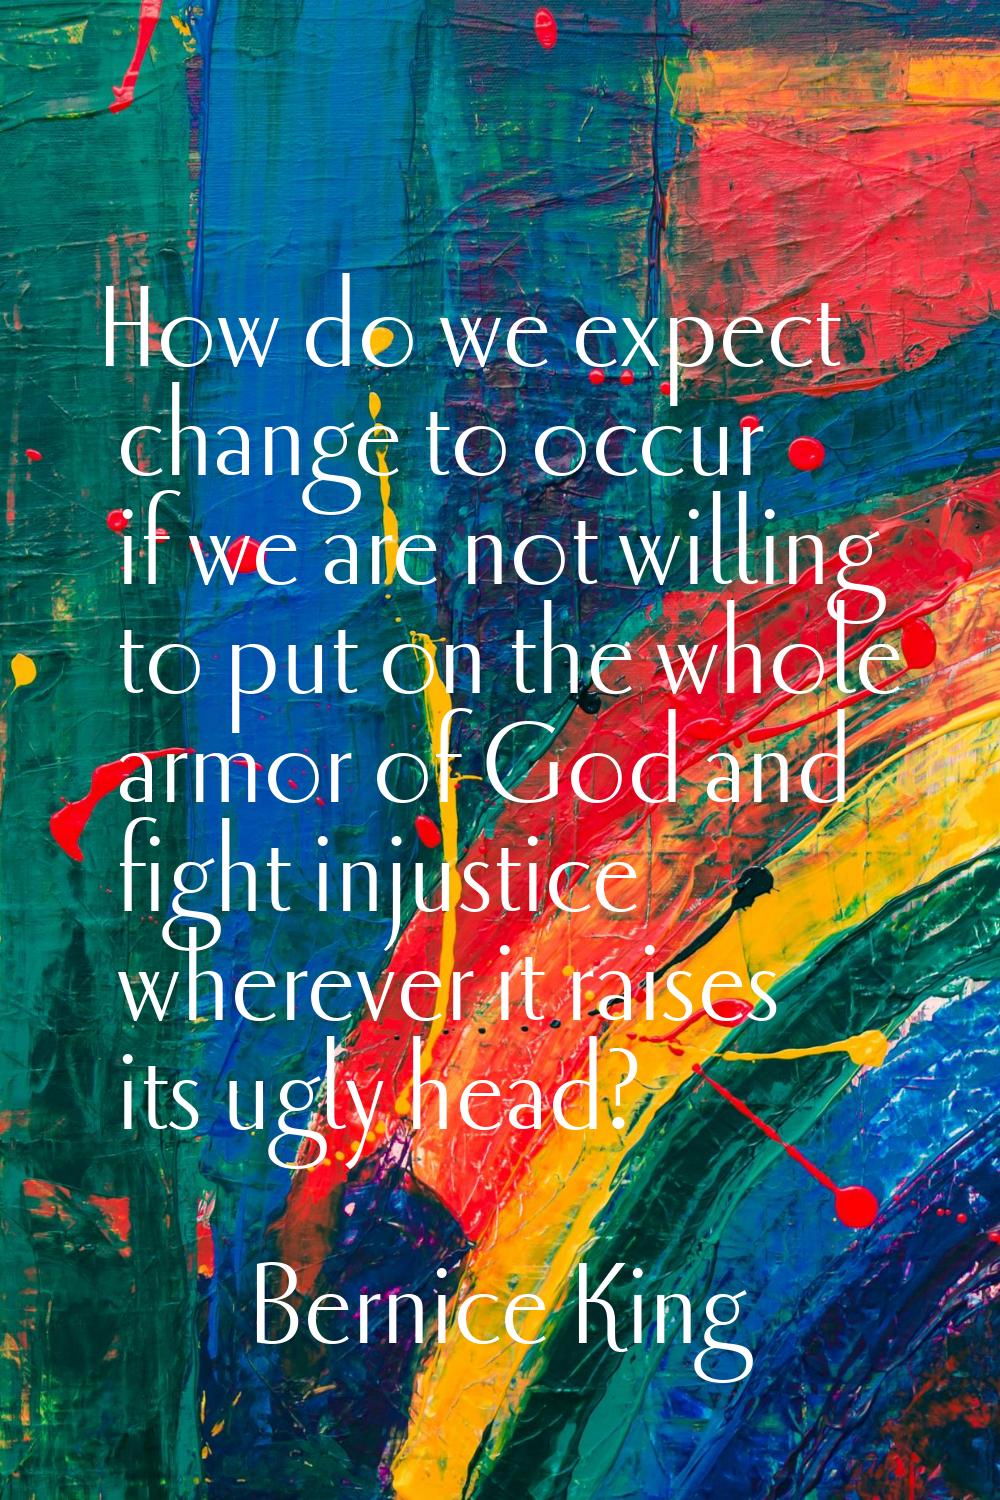 How do we expect change to occur if we are not willing to put on the whole armor of God and fight i